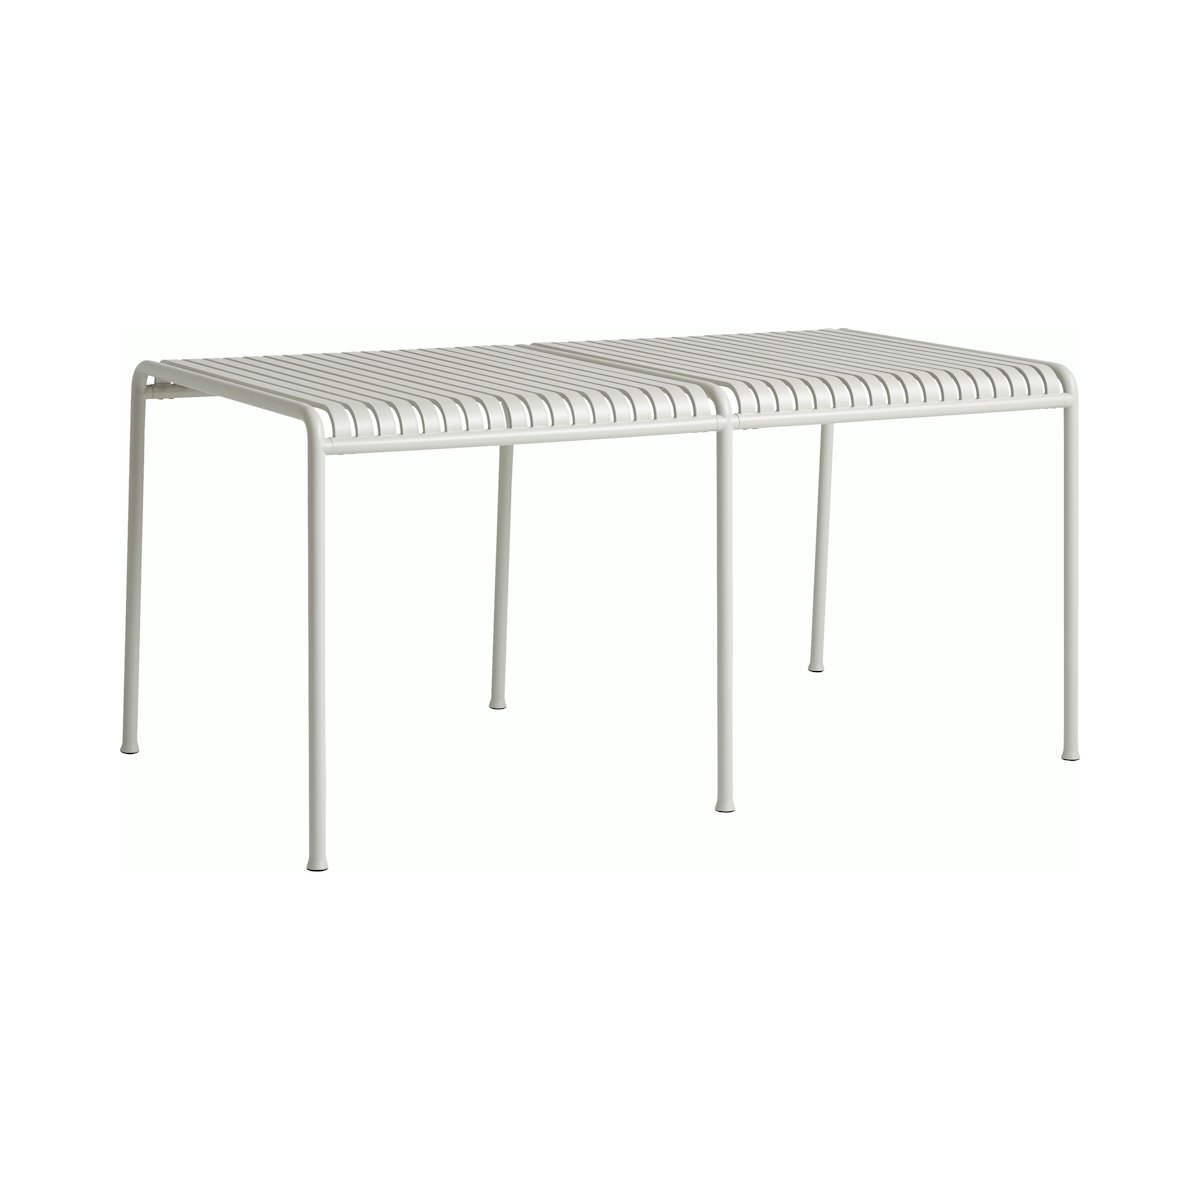 Palissade Table with Middle Leg